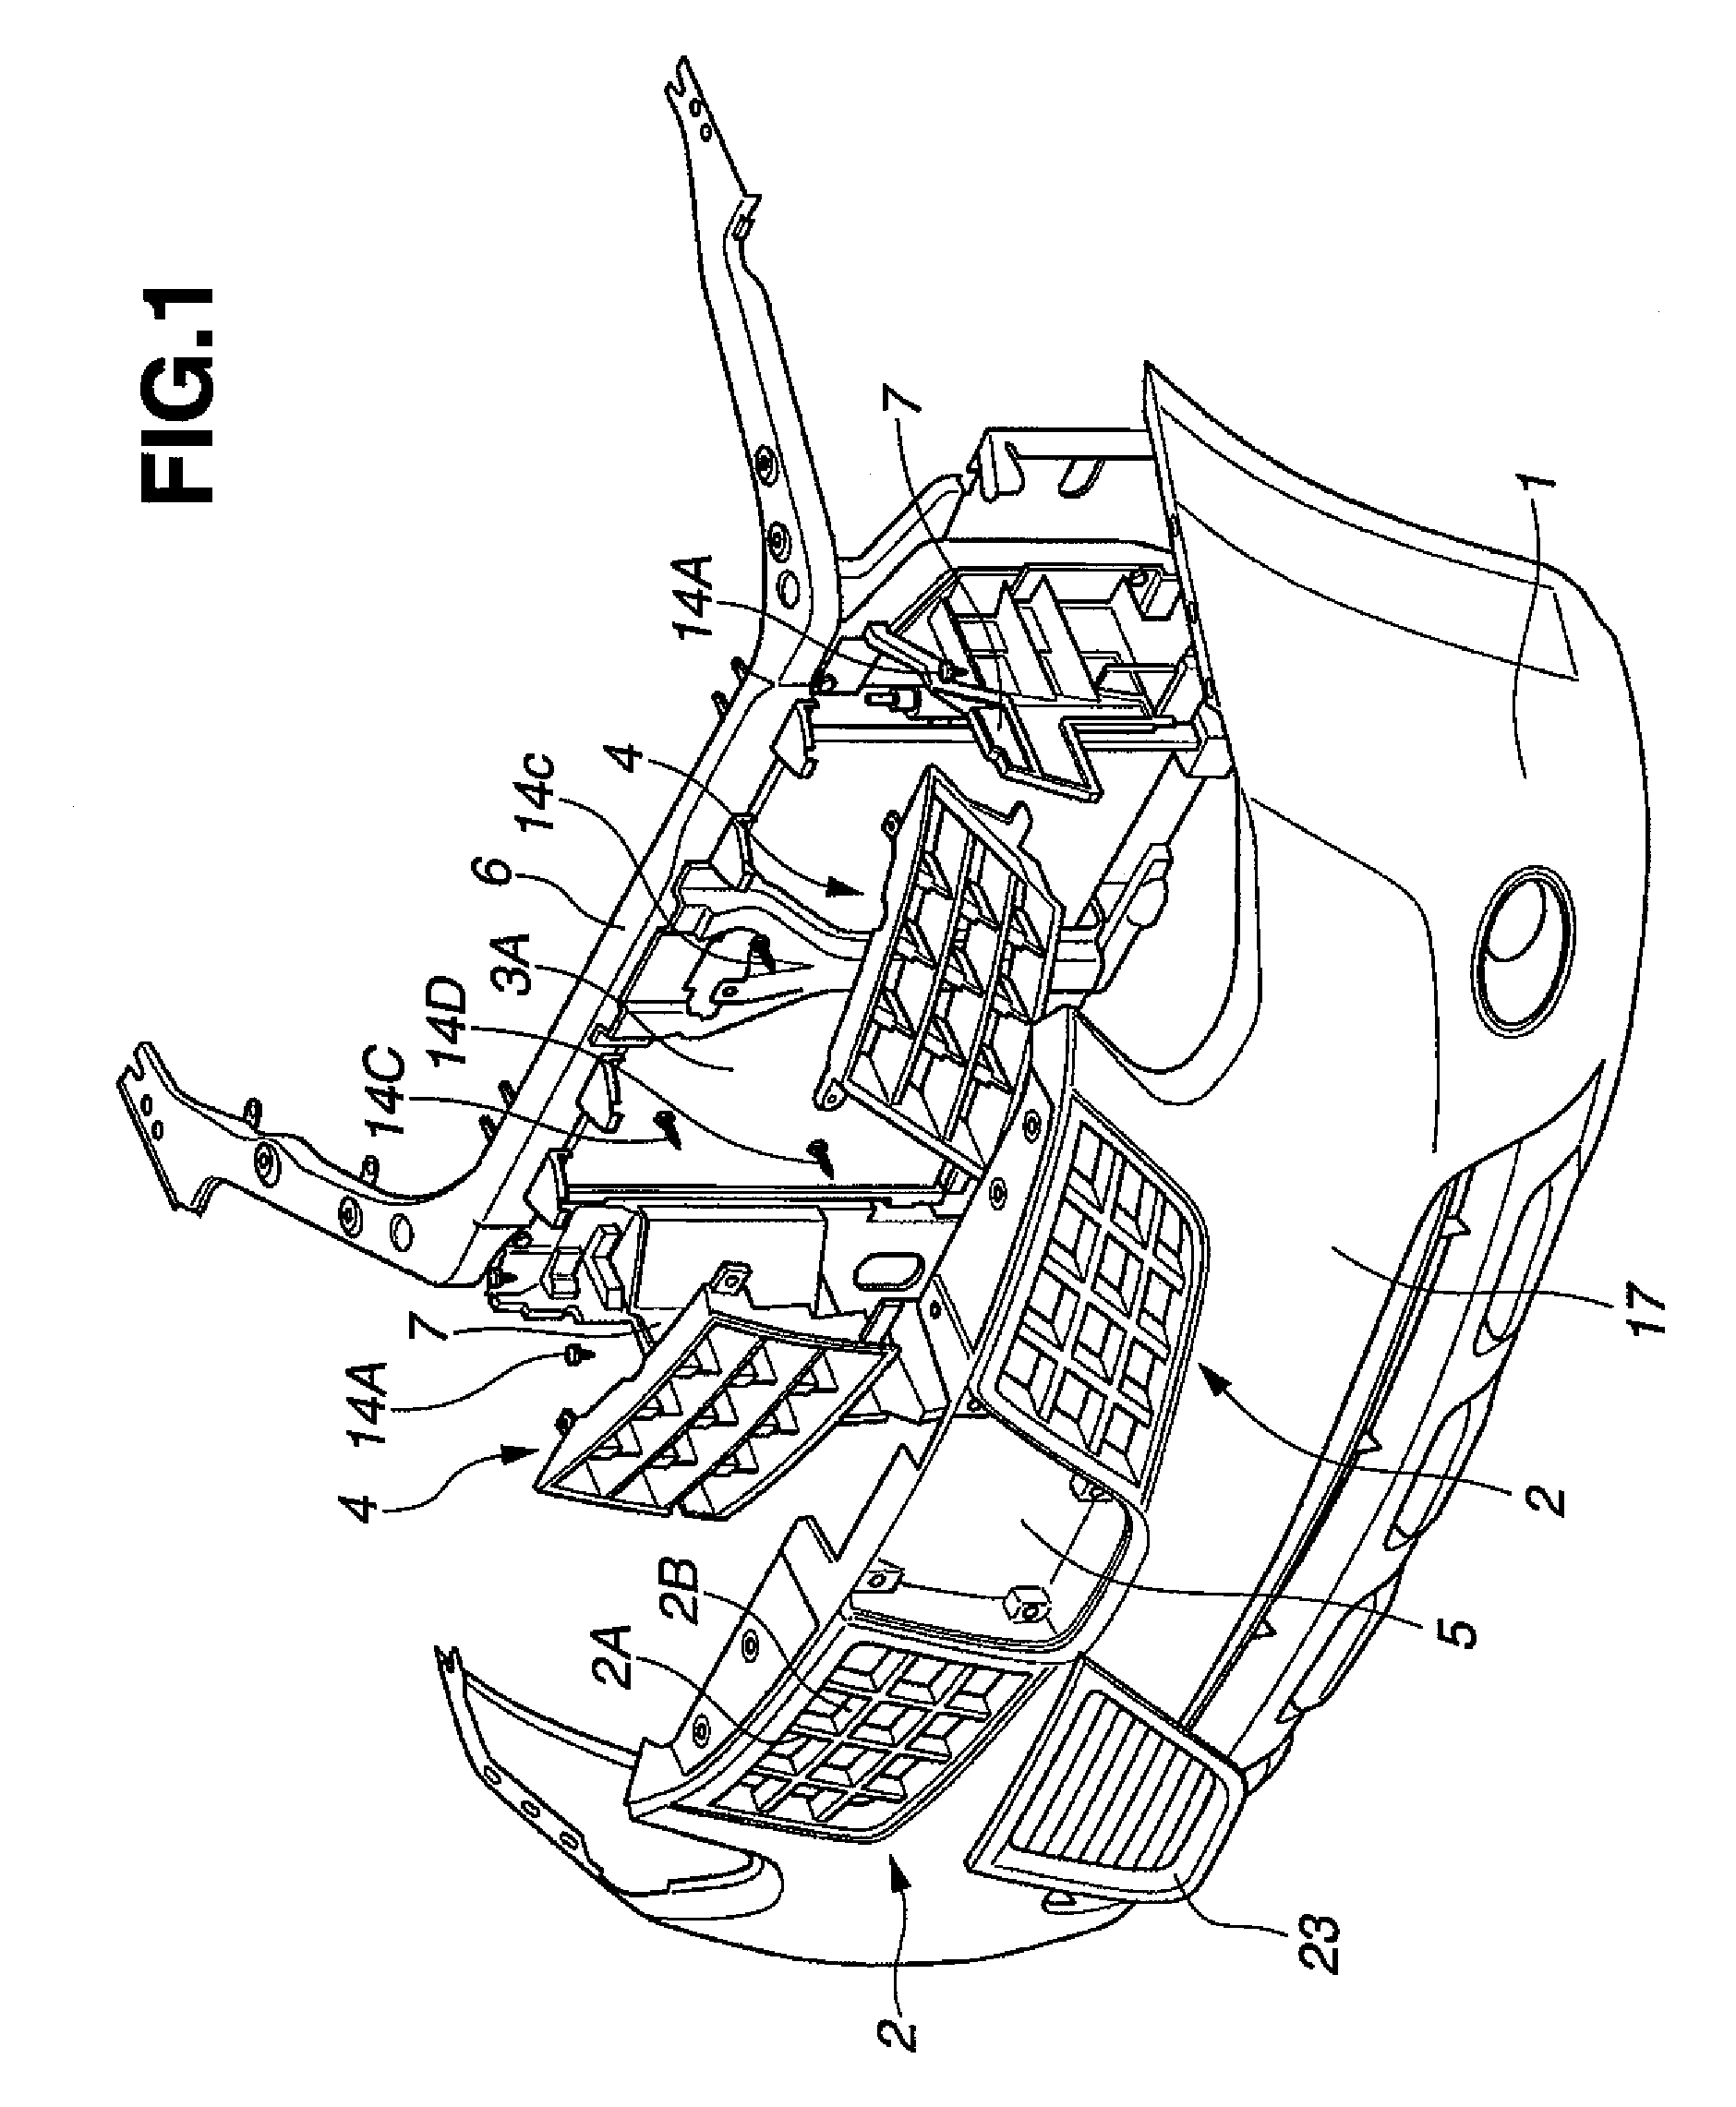 Grid member and vehicle front structure with the grid member